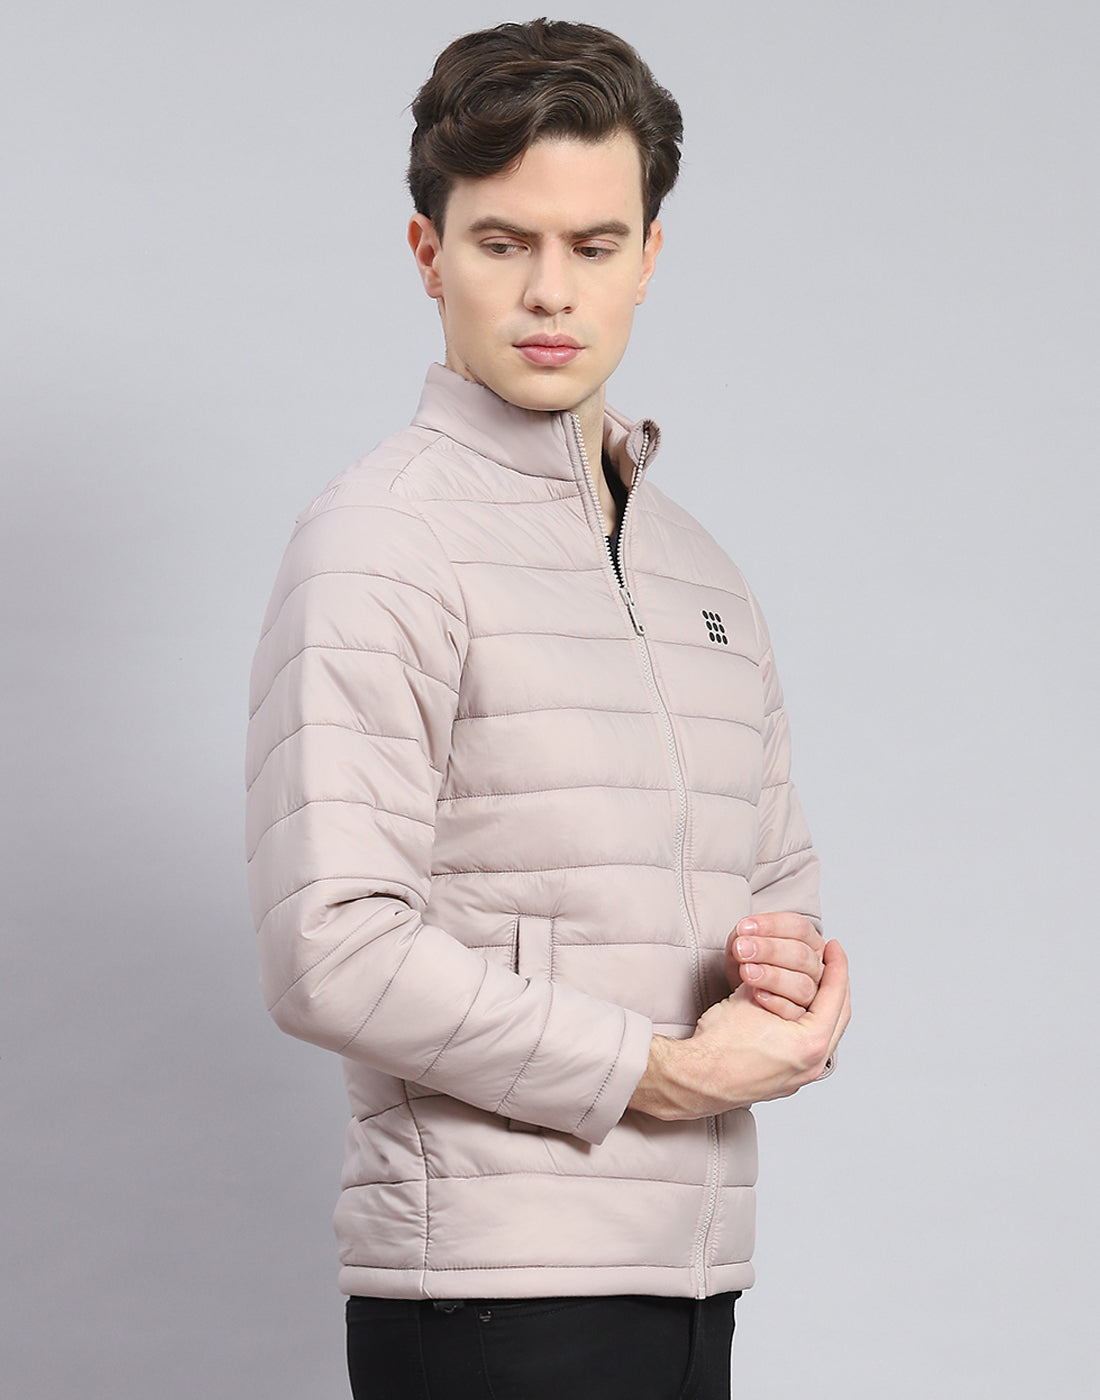 Men Grey Solid Stand Collar Full Sleeve Jacket